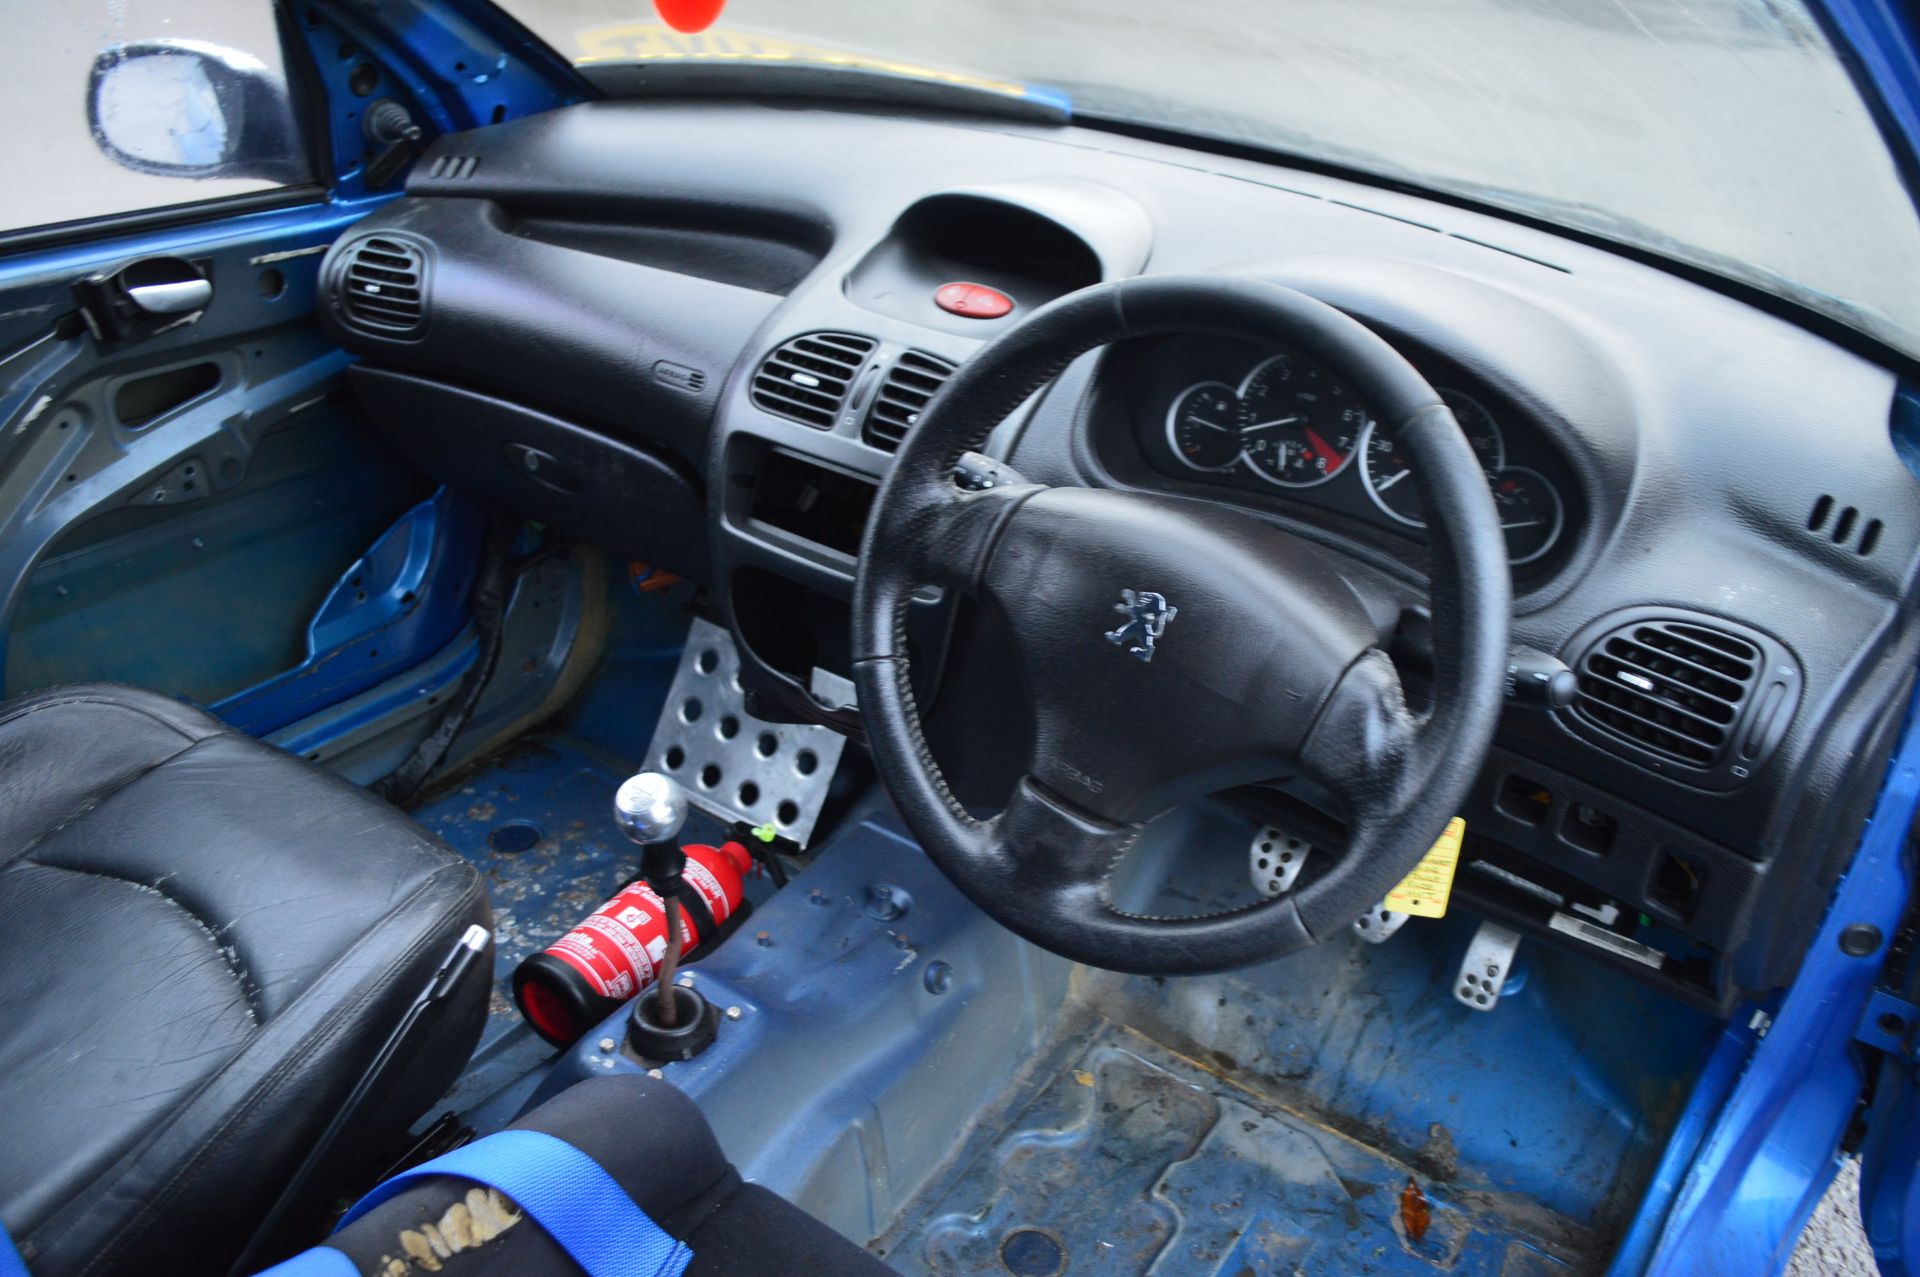 2003/03 REG PEUGEOT 206 GTI 180HP FAST TRACK DAY CAR  HAS THE 'VAN' PANELS FITTED INSTEAD OF REAR - Image 13 of 15